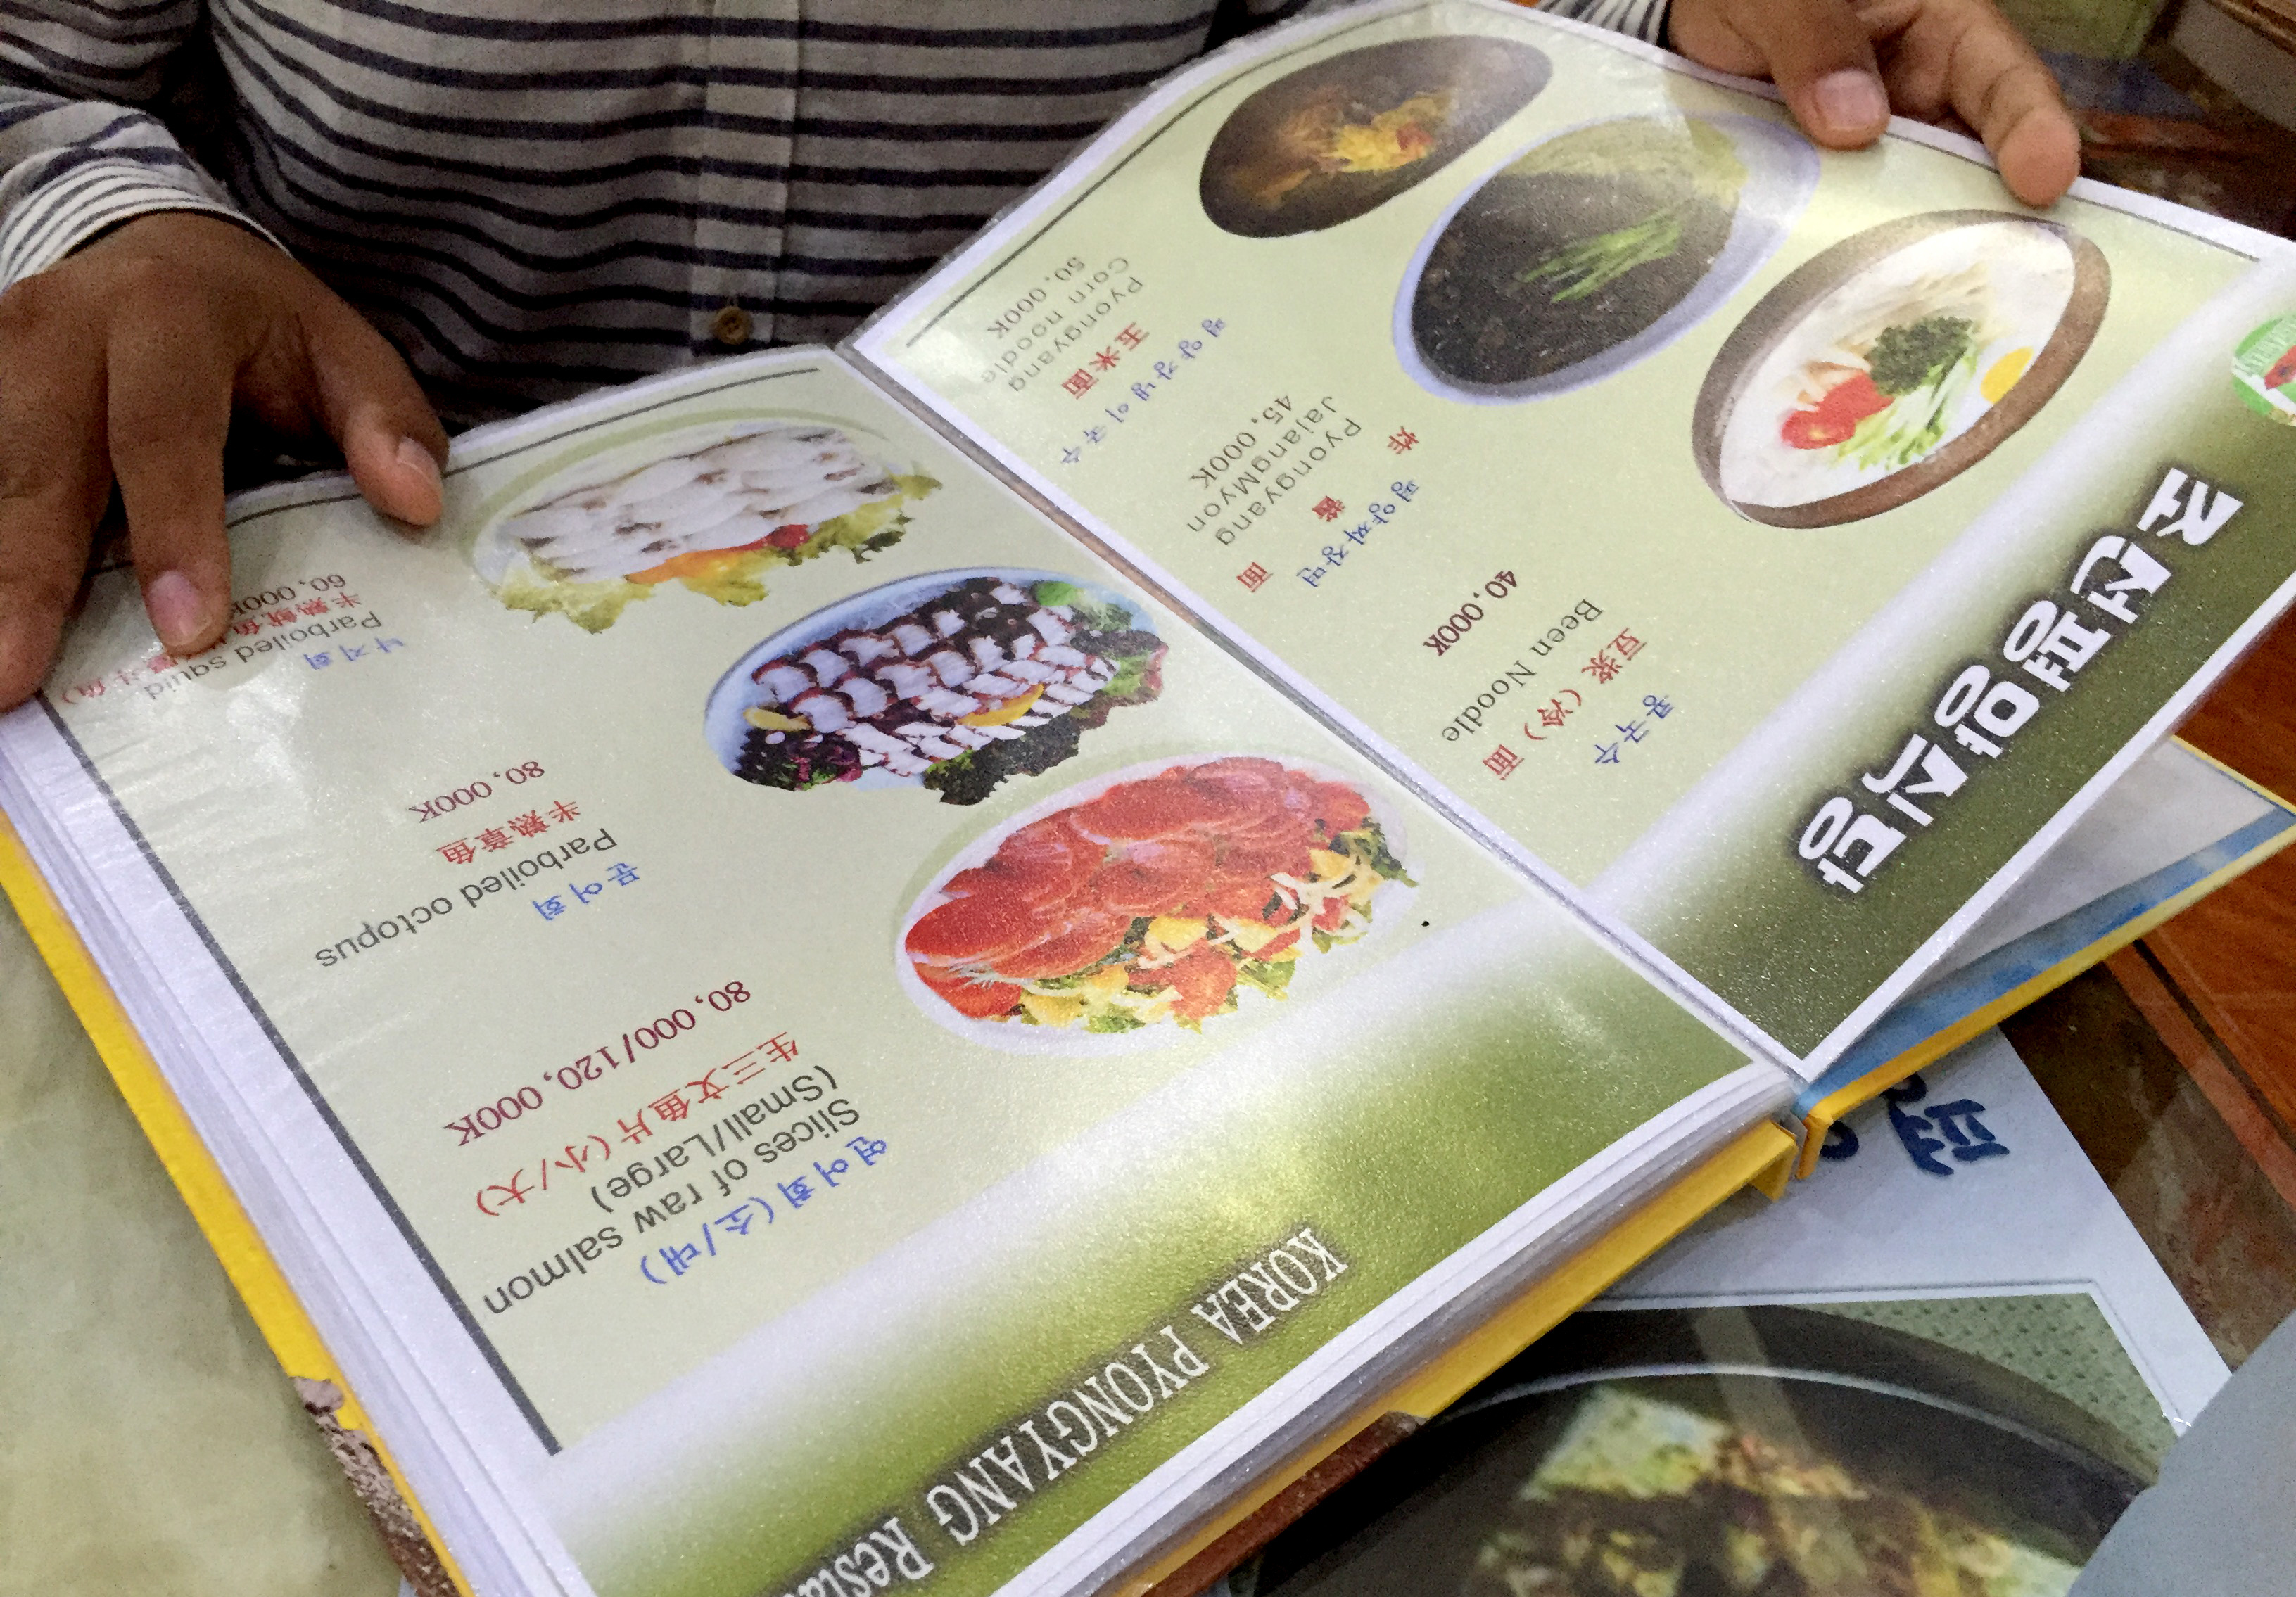 North Korean-run restaurants outside the country are said to number at least 100, and their menus are typically similar. Curiously, the main dishes here aren't served with the Korean dining staple of banchan, or side dishes, which usually come for free. Instead, this restaurant charged for them.